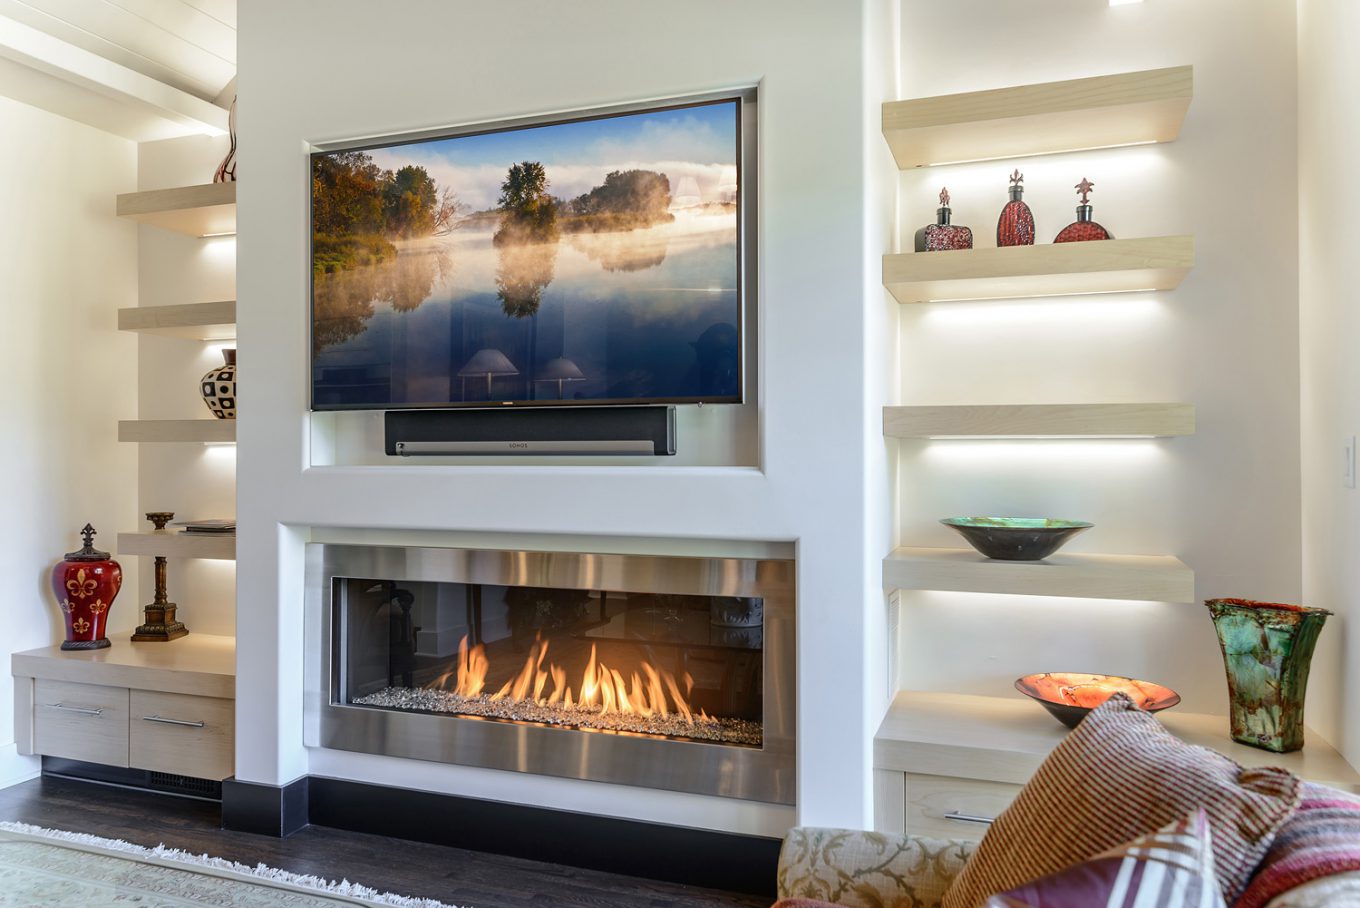 Install A Tv Over Fireplace, Televisions Over Fireplaces